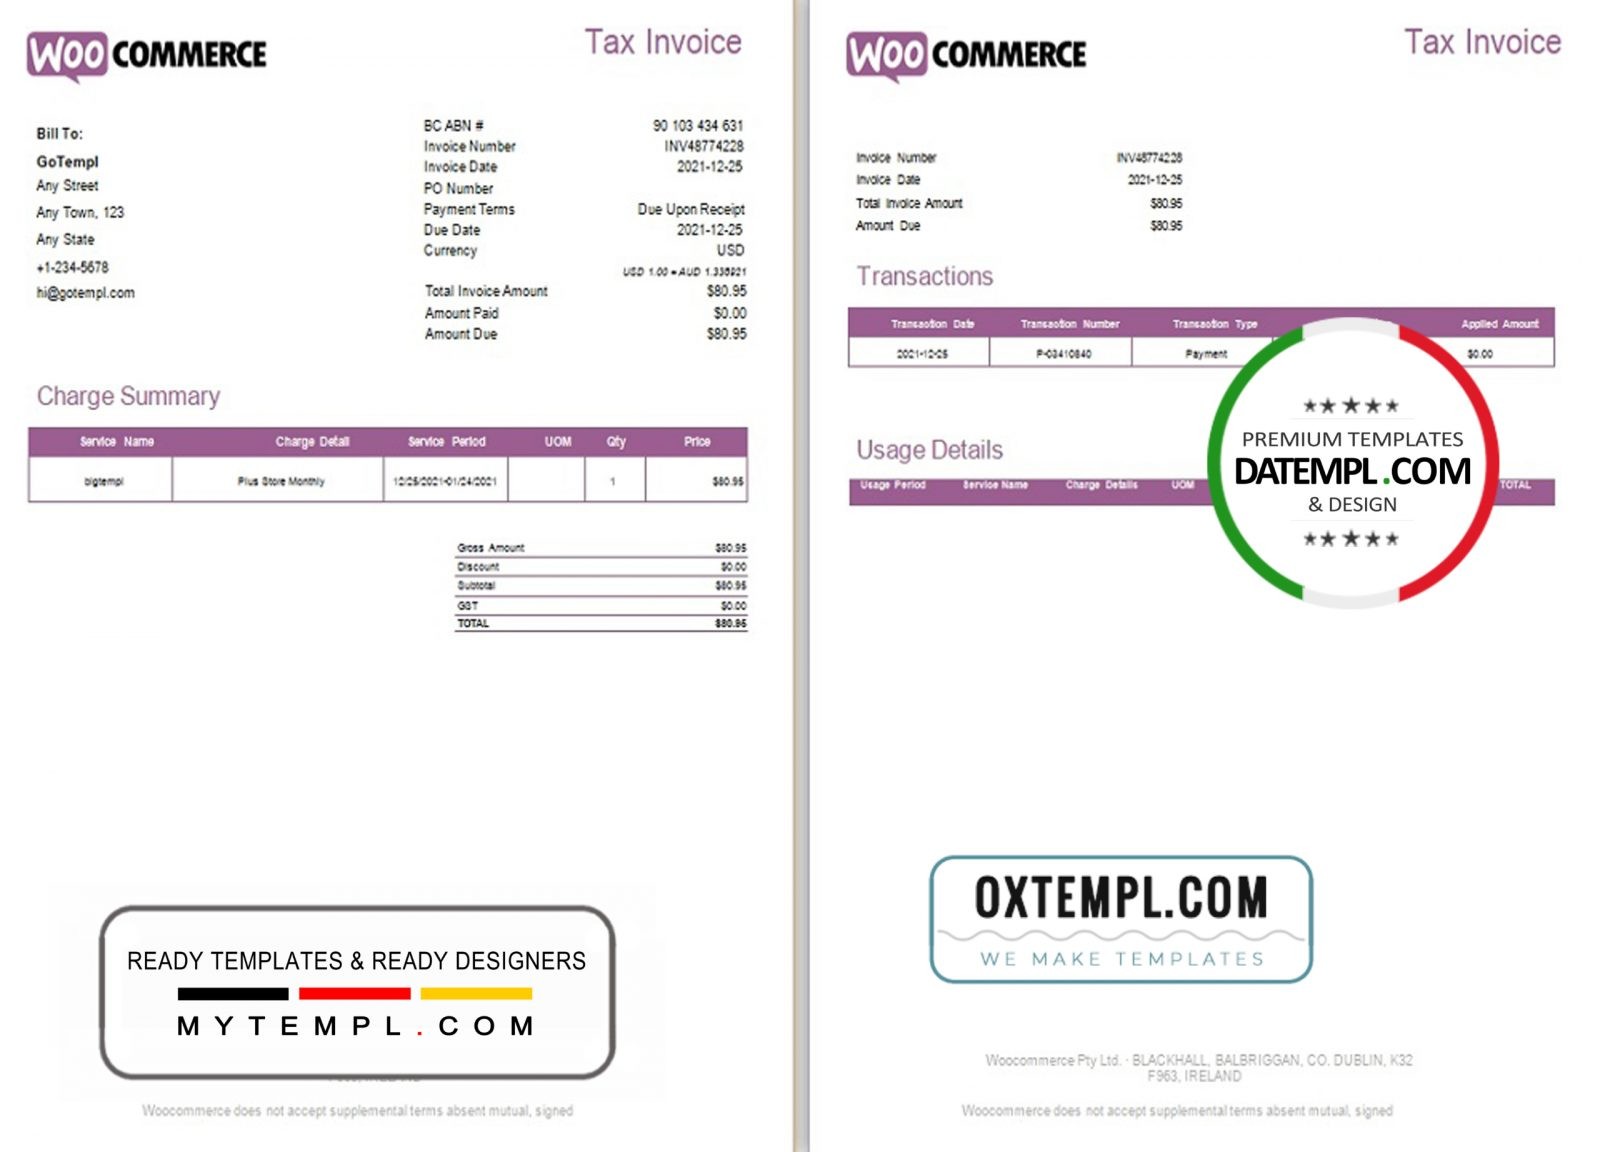 Irish WooCommerce tax invoice example in .doc and .pdf format, fully editable